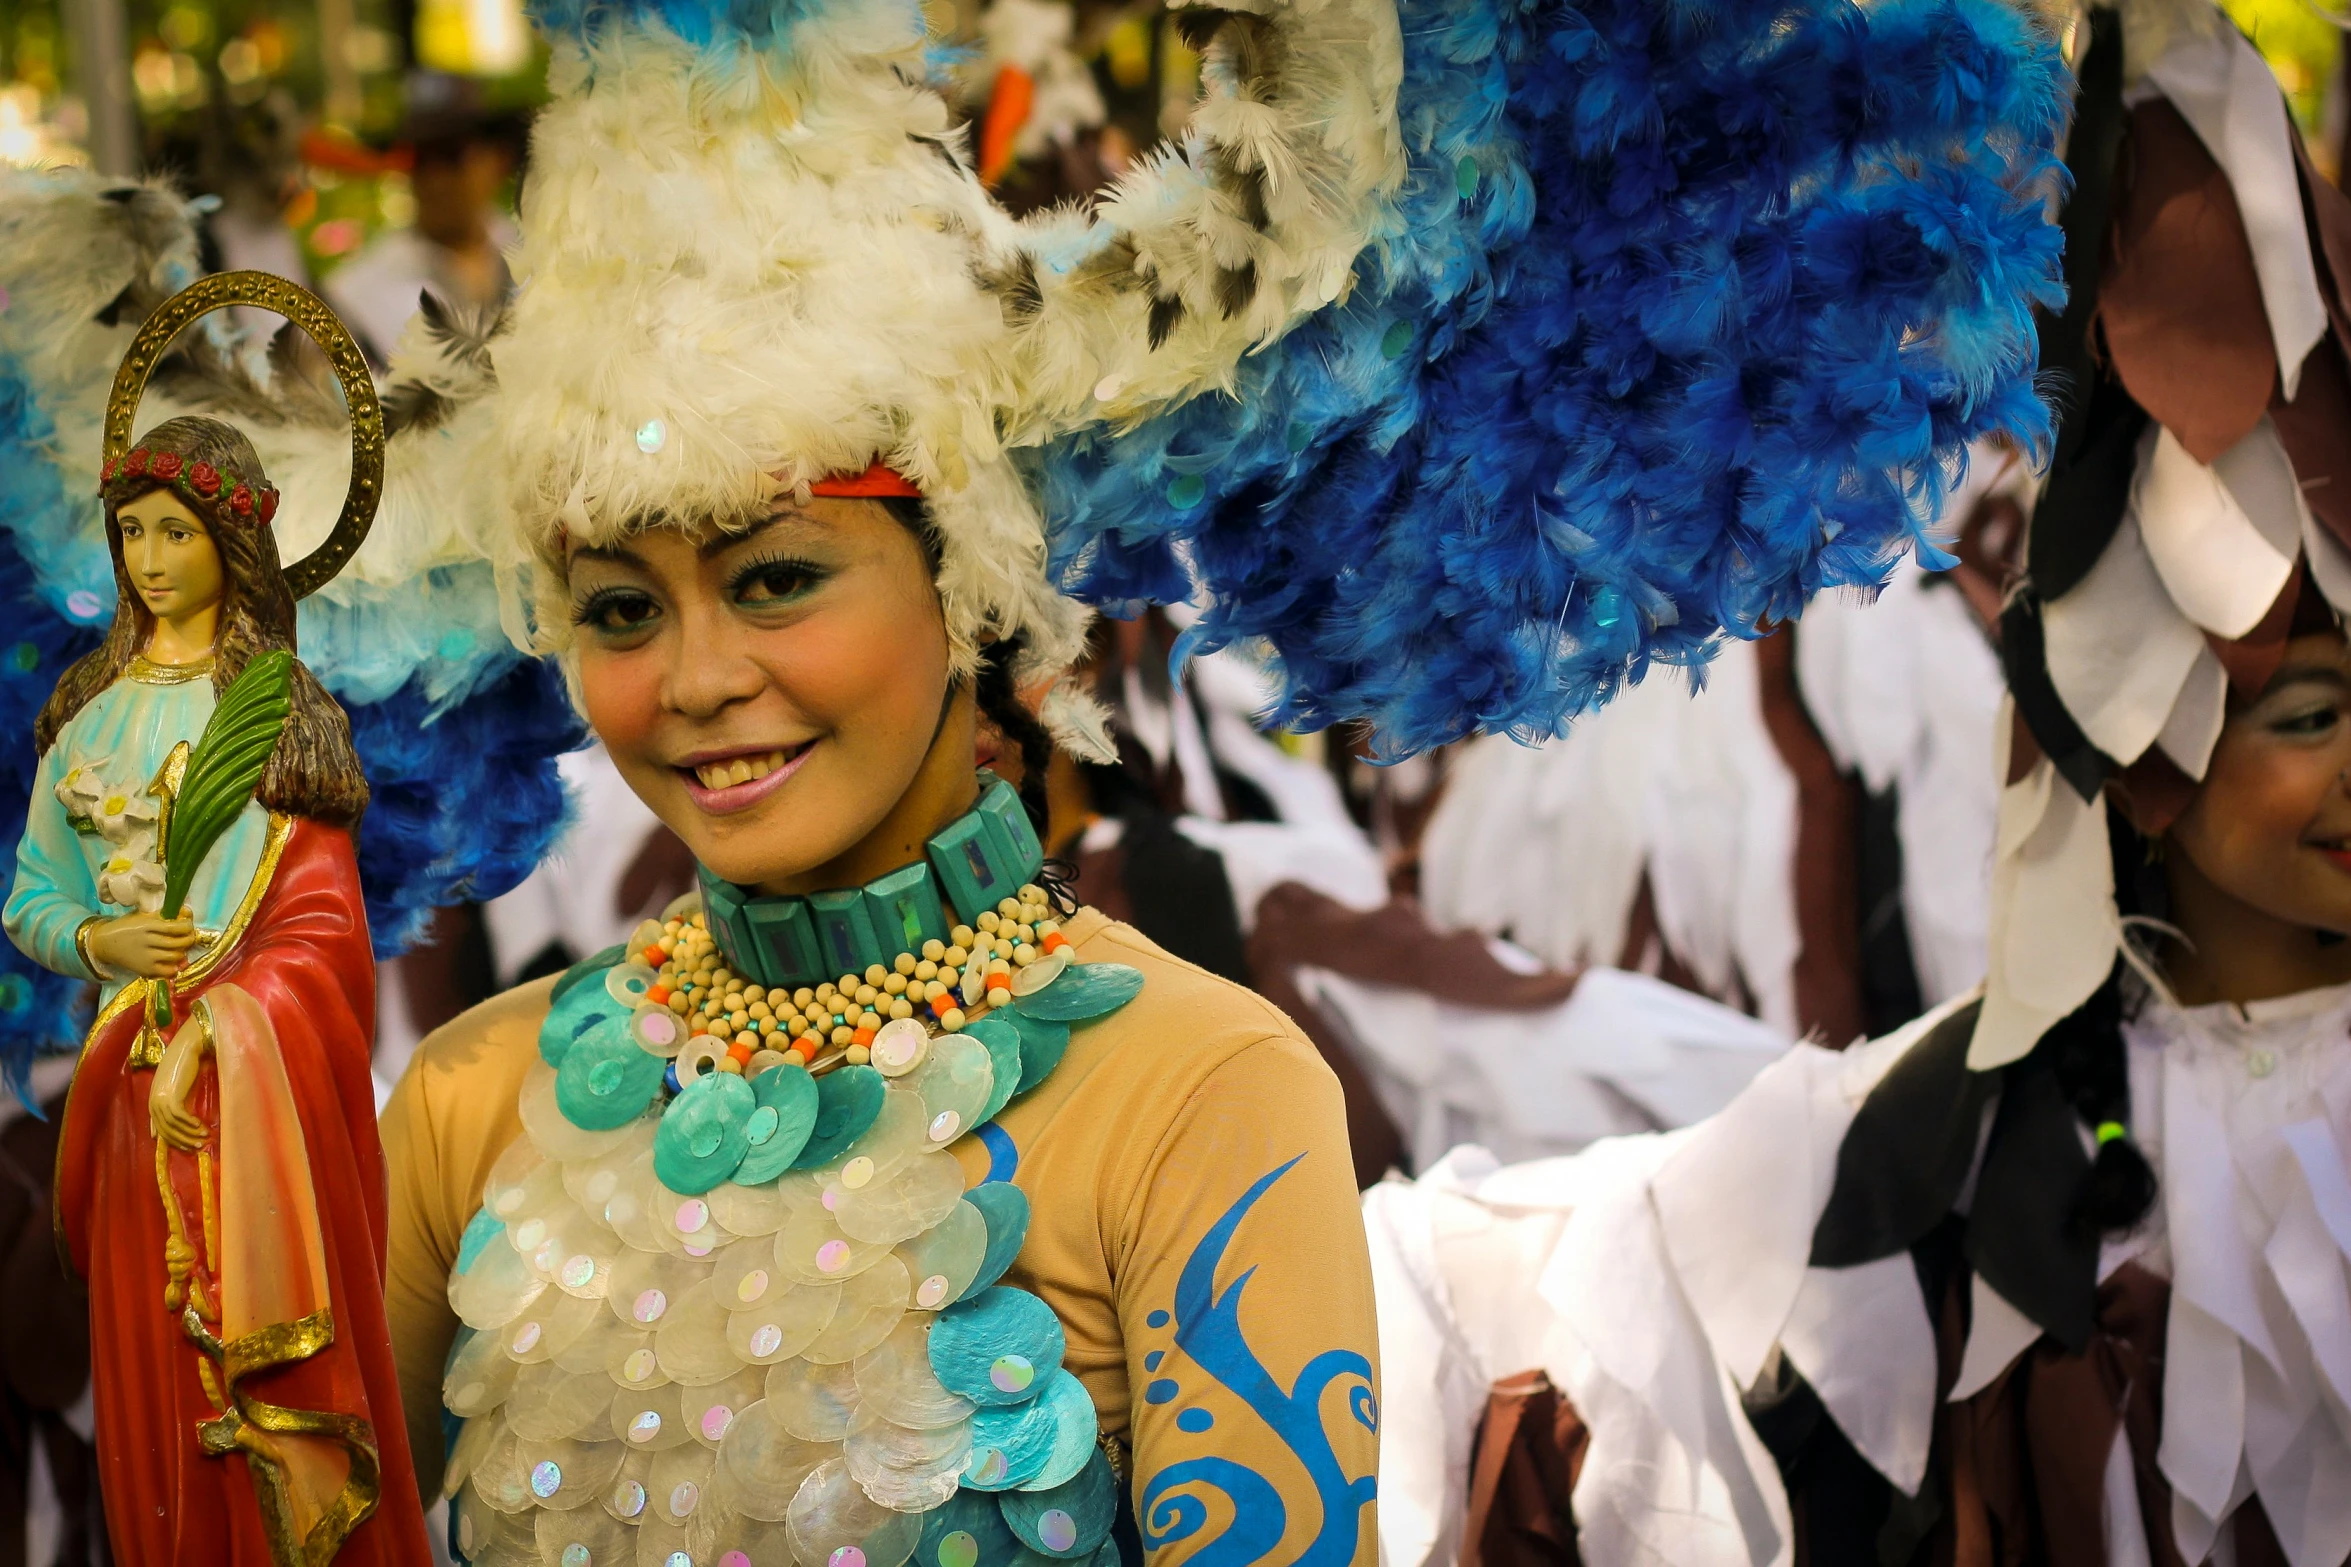 a girl wearing brightly colored costume next to colorful performers